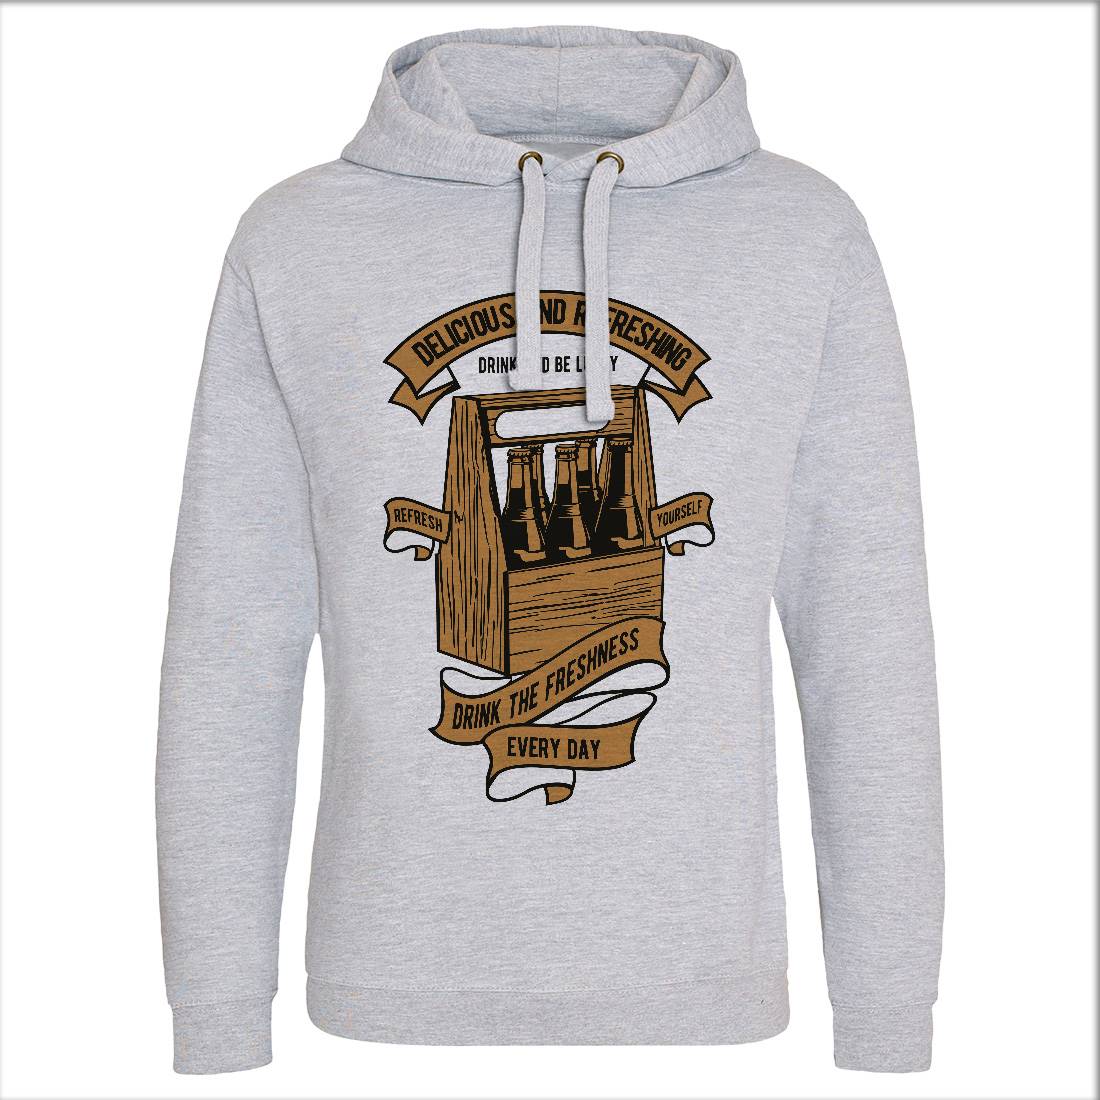 Drink The Freshness Mens Hoodie Without Pocket Drinks D526